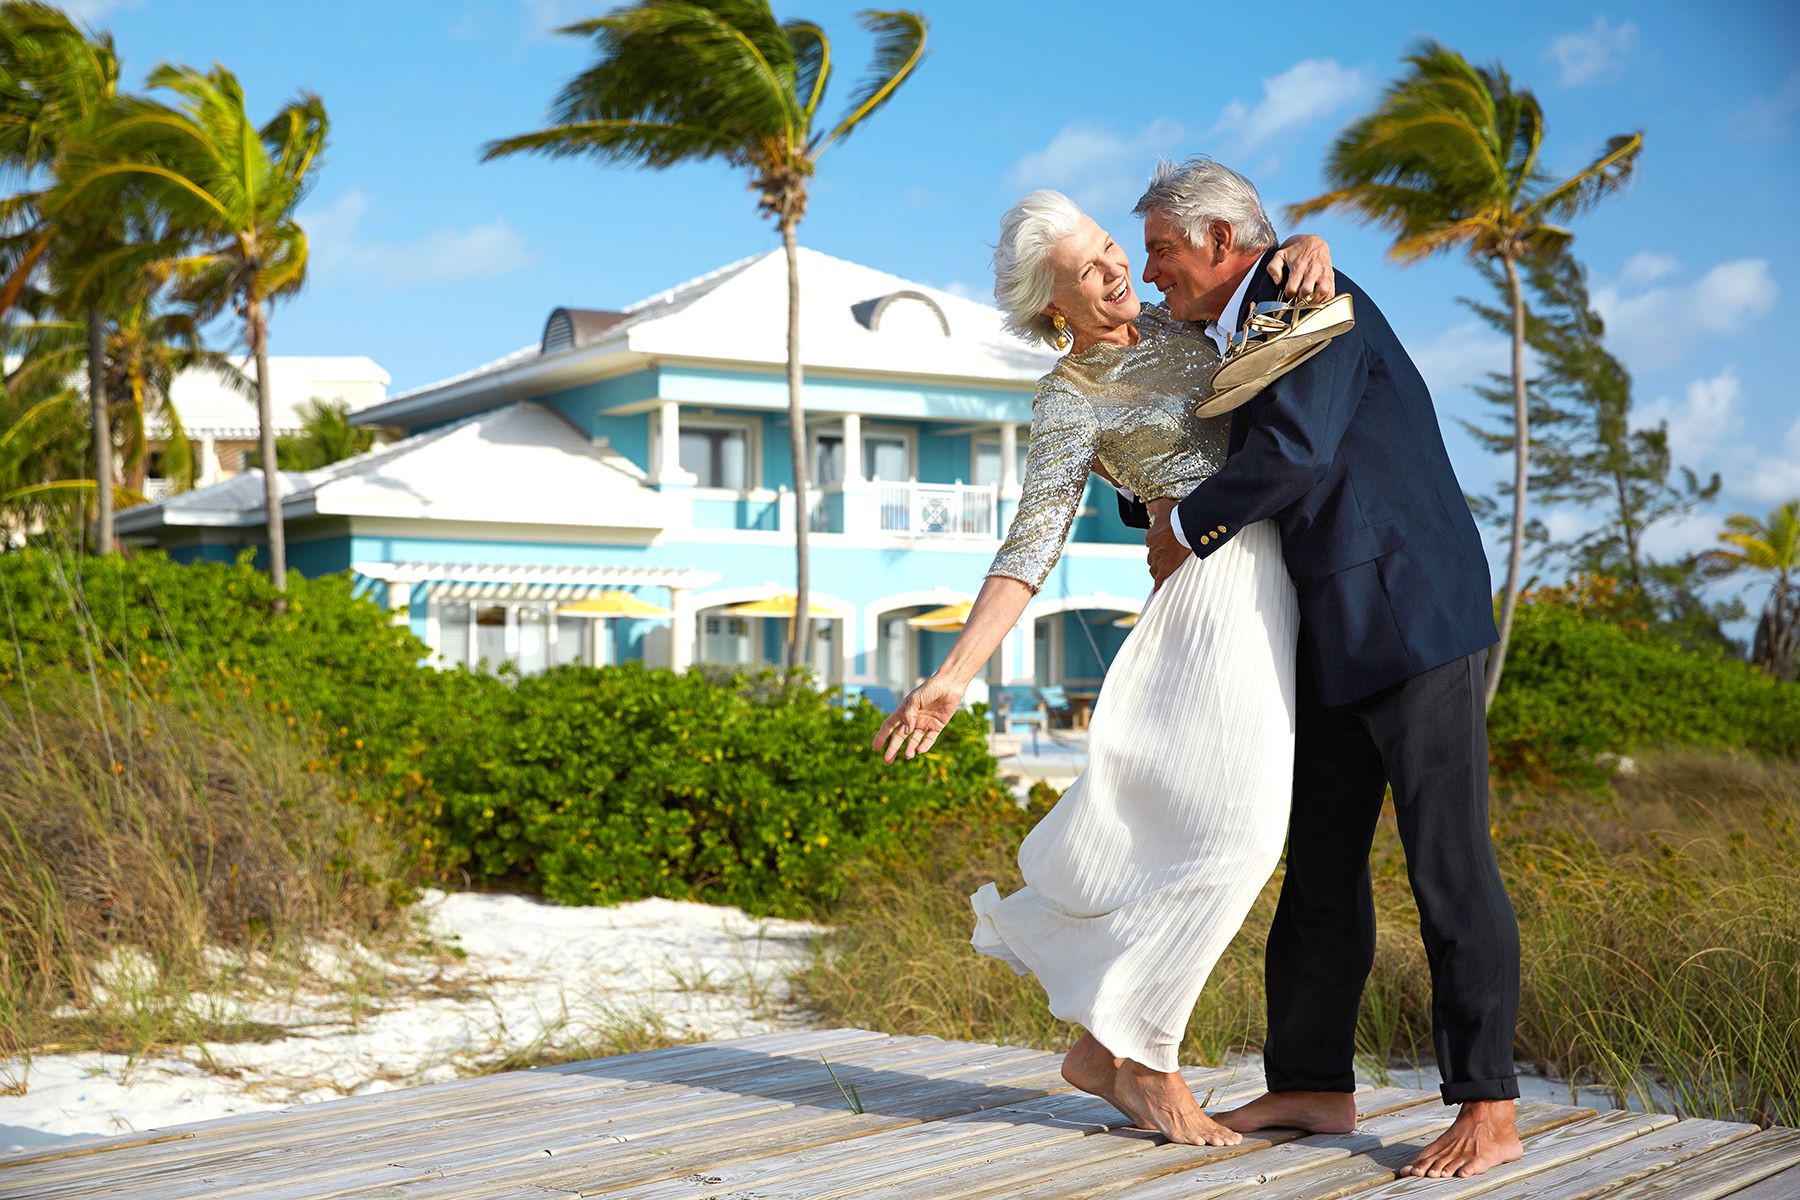 Young At Heart — Here Are The Best Vacation Ideas For Elderly Parents